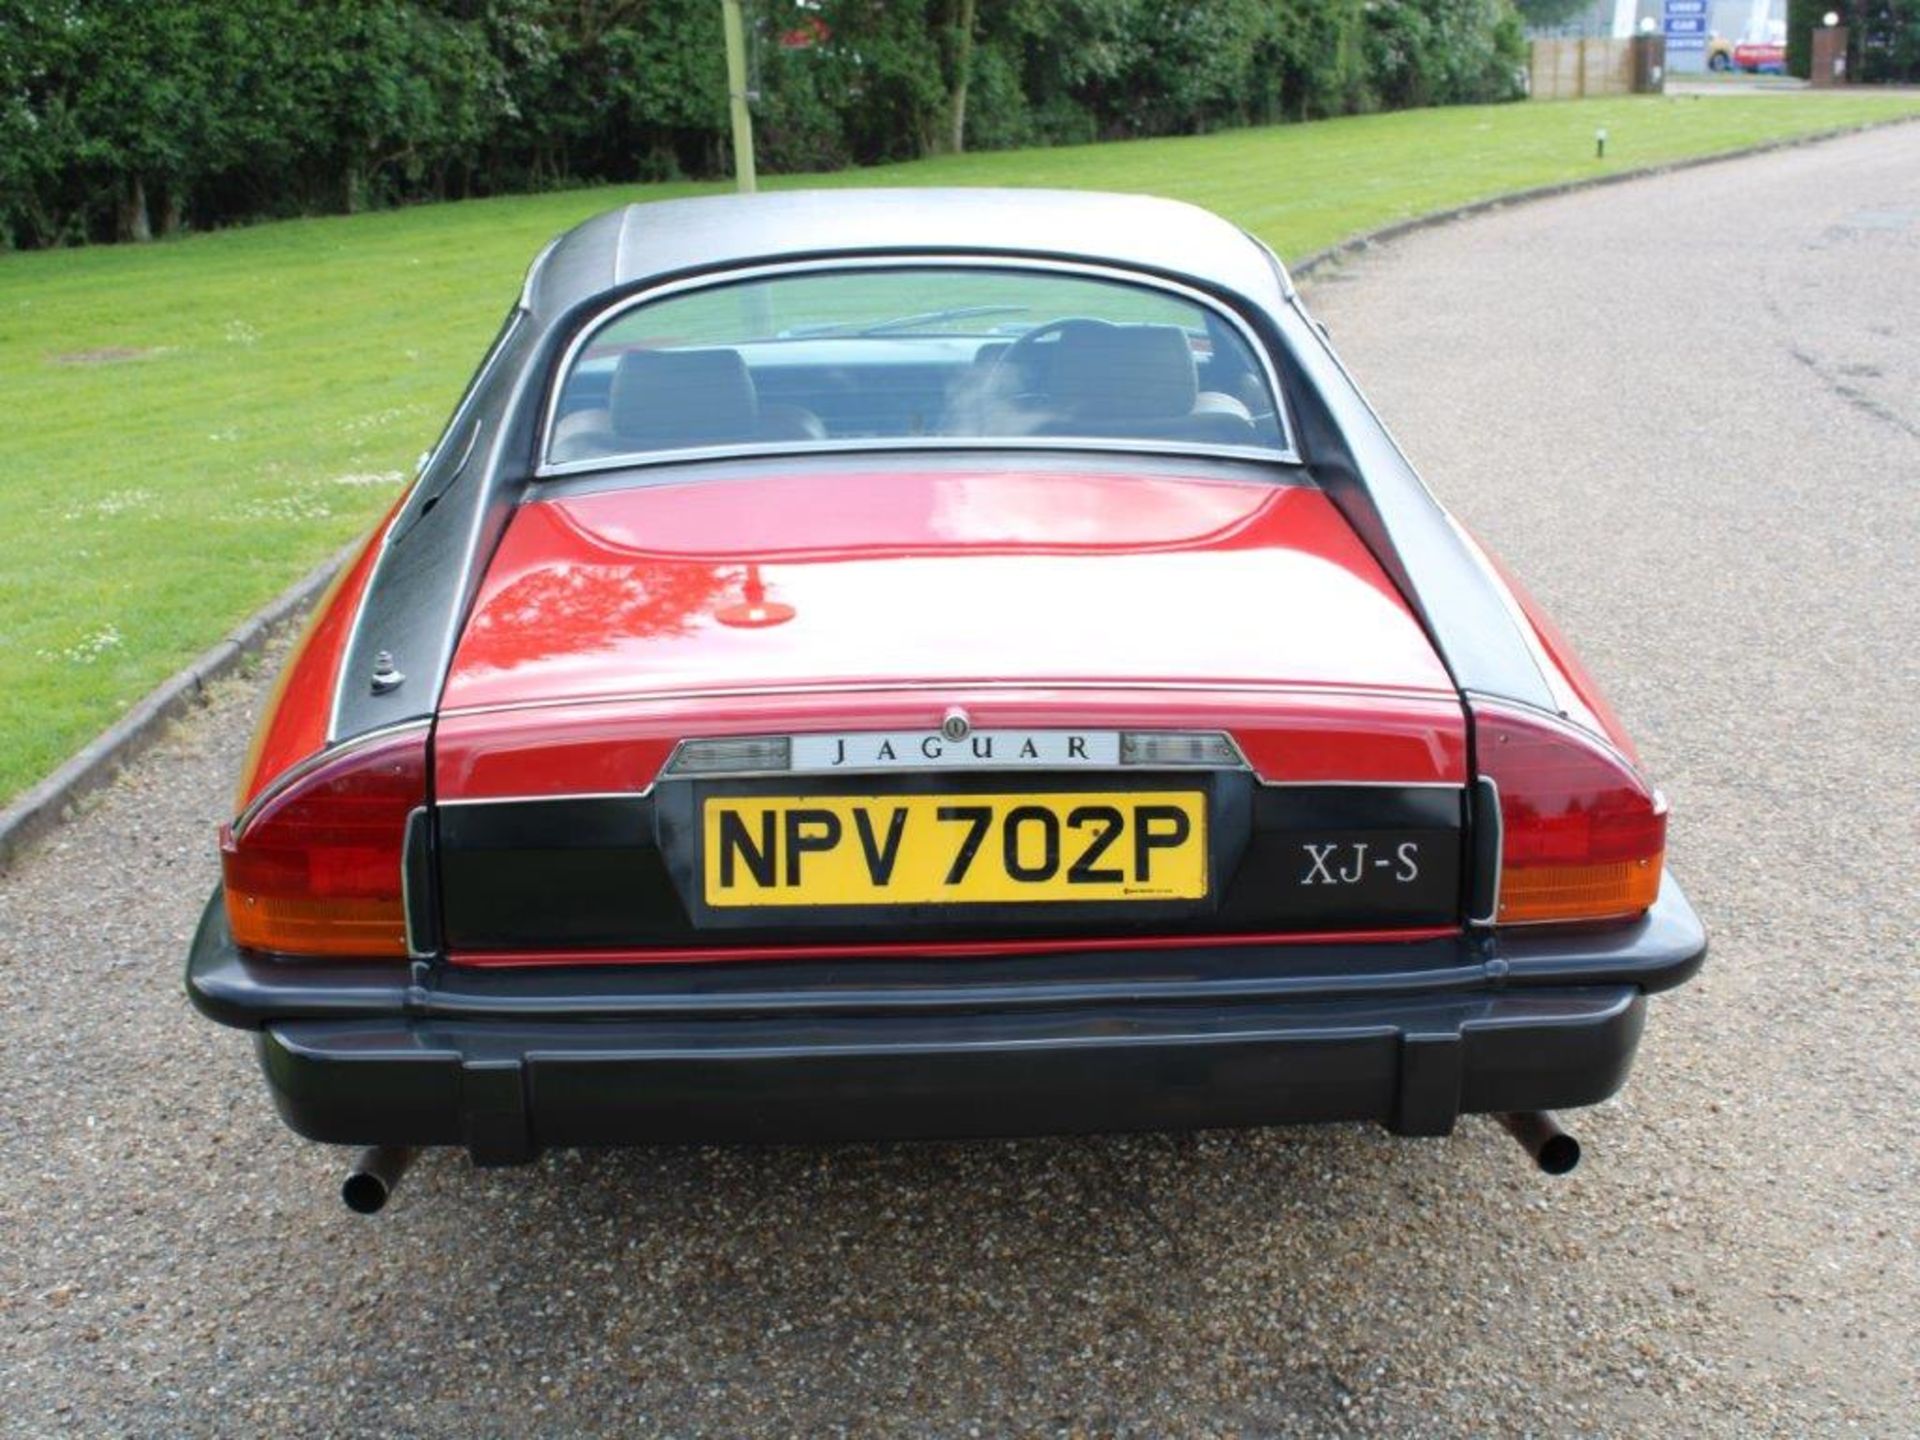 1976 Jaguar XJ-S 5.3 V12 Coupe Auto 29,030 miles from new - Image 3 of 28